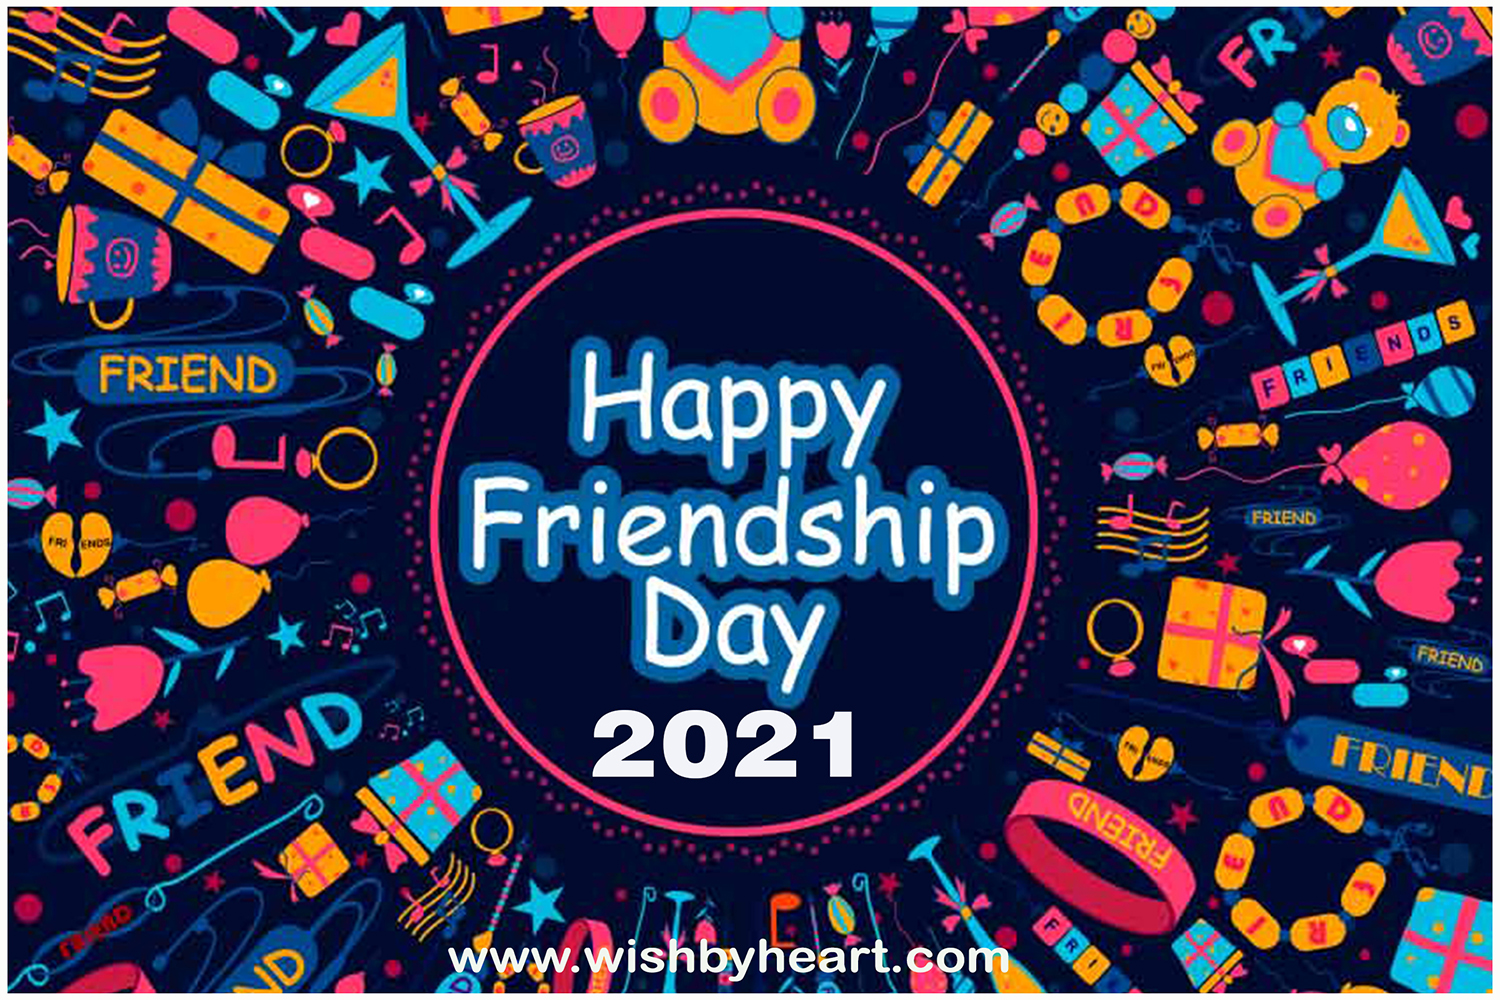 happy-friendship-day-quotes-english